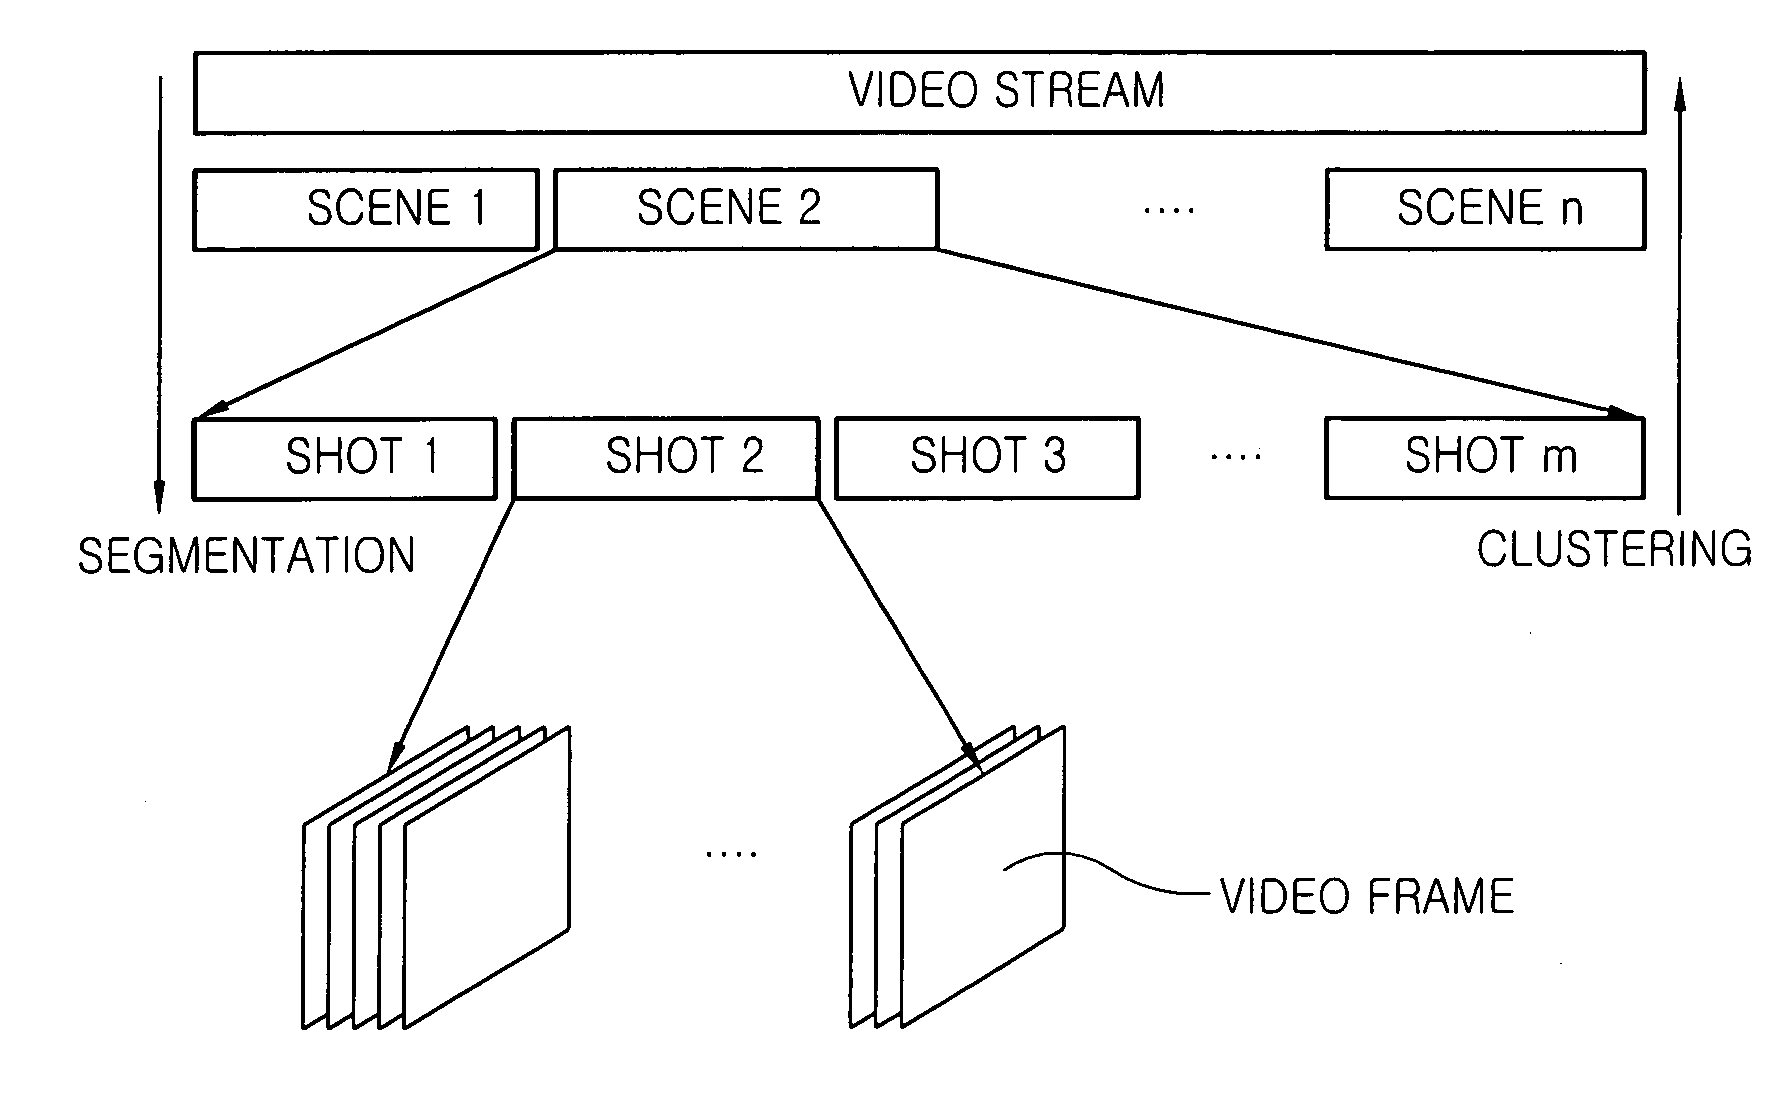 Hierarchical hybrid shot change detection method for MPEG-compressed video